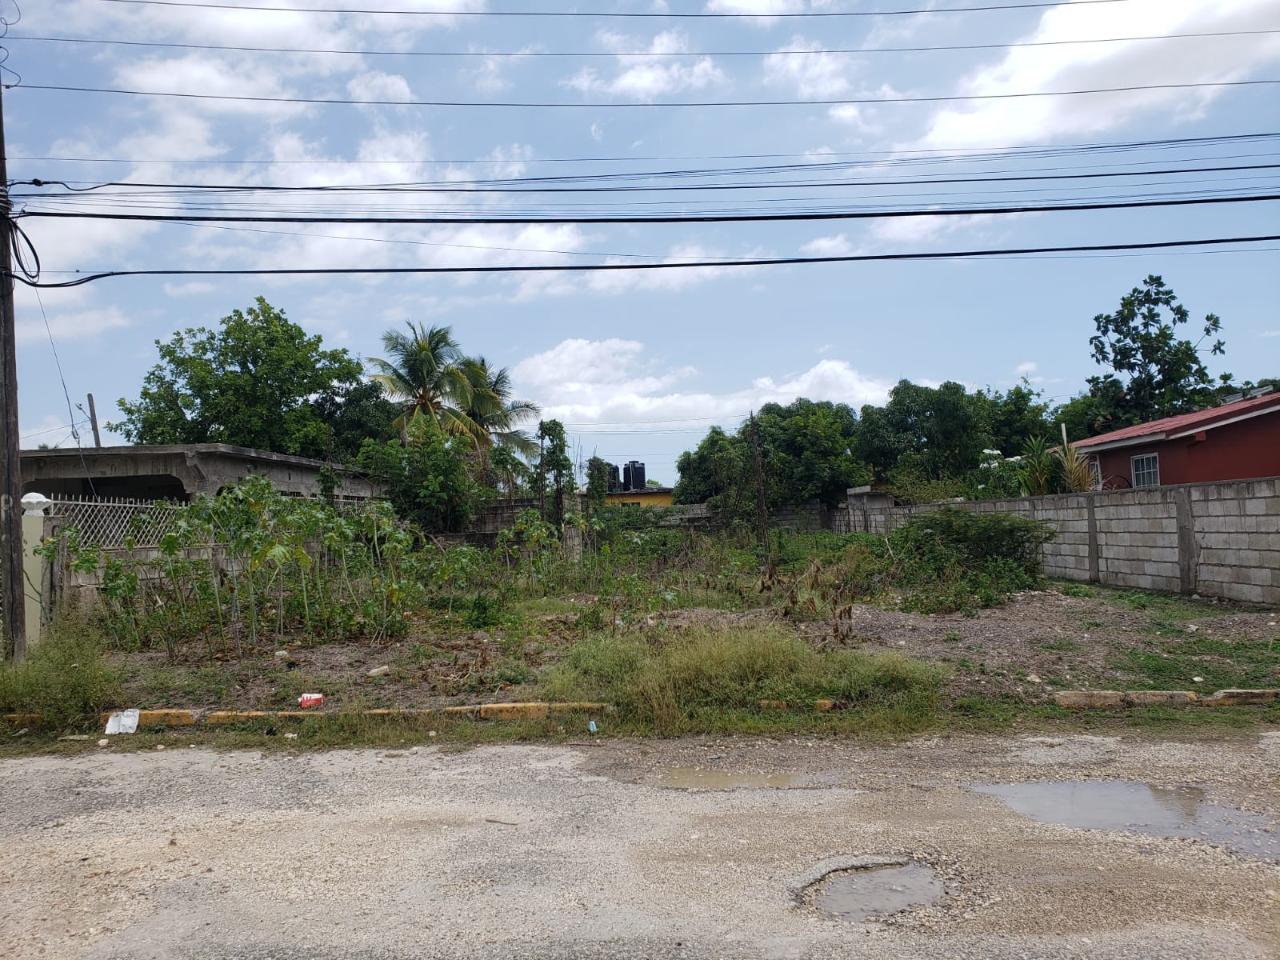 Residential Lot For Sale: SIMPSON AVENUE, Spanish Town | $6,000,000